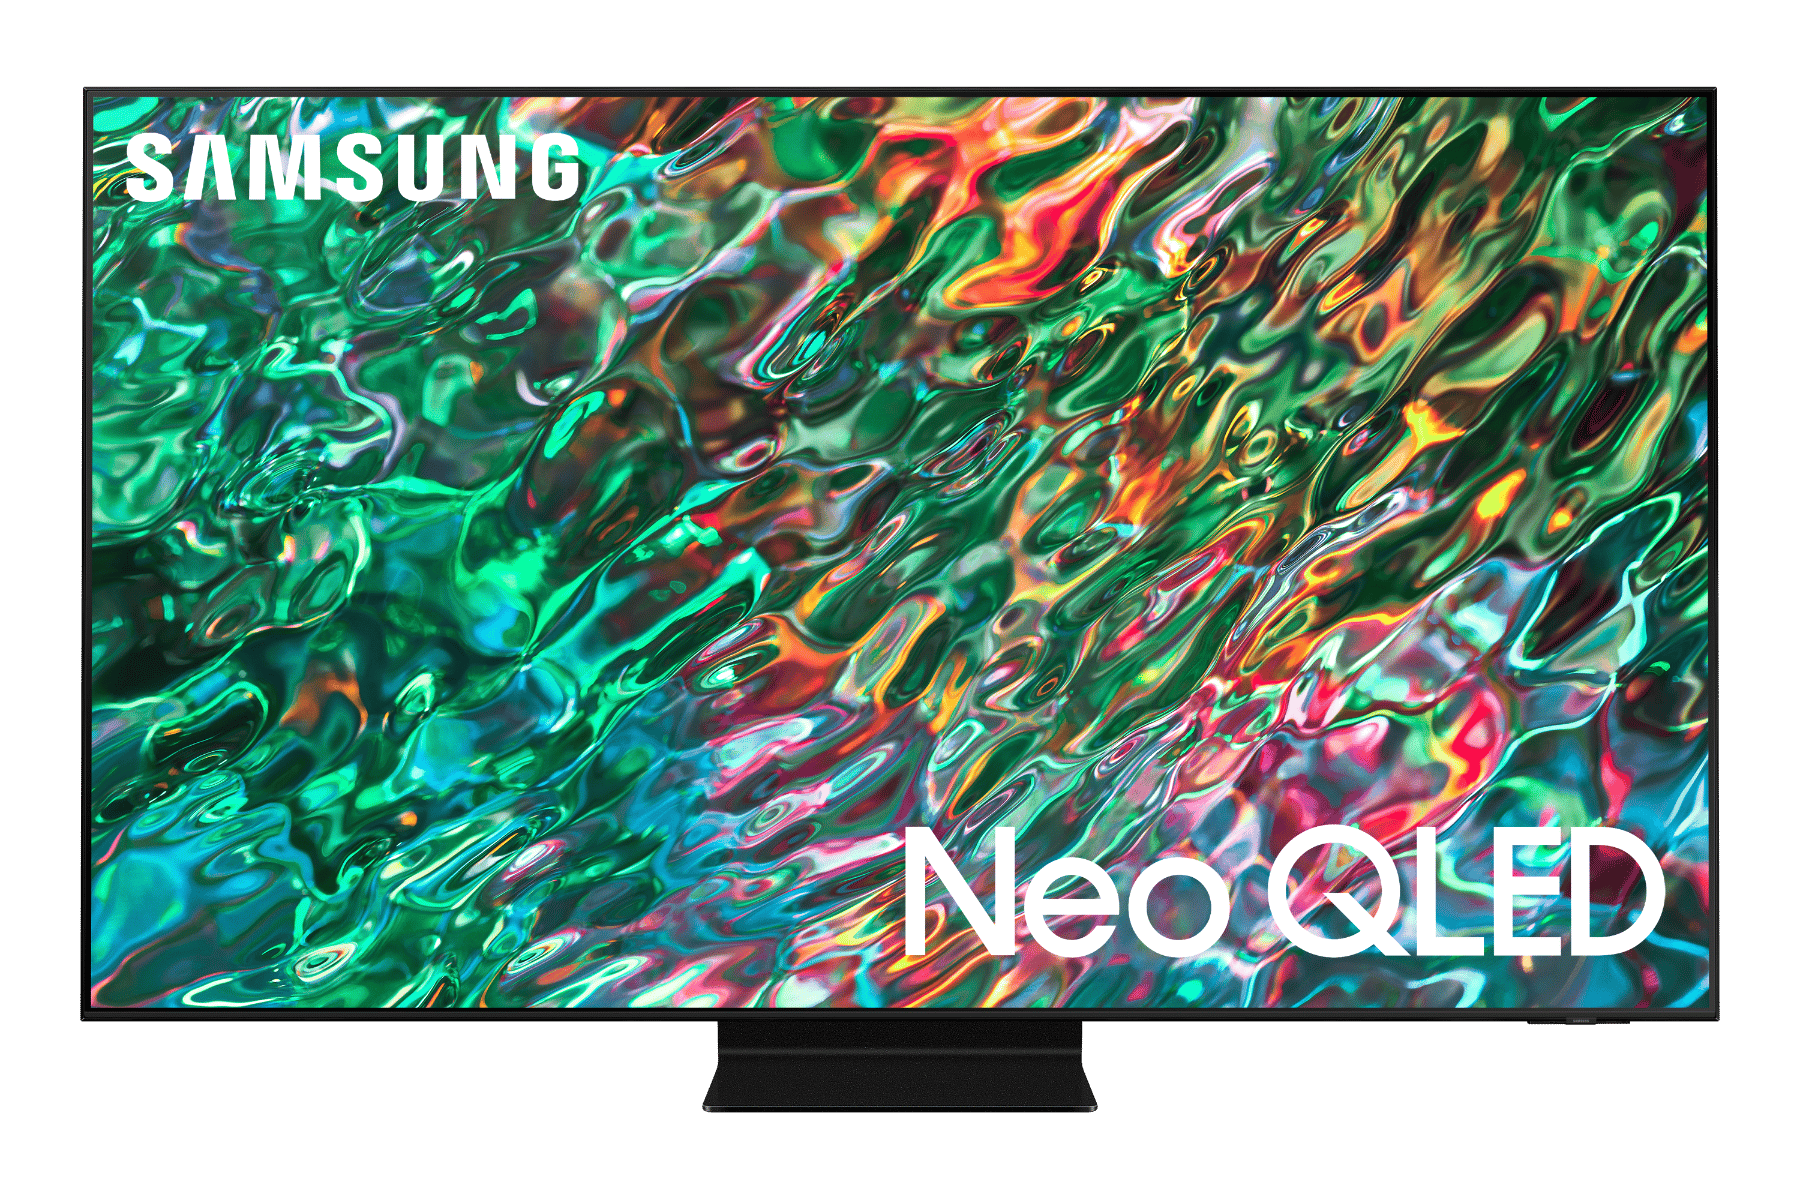 Samsung 65 Inch Neo 4K Smart QLED TV with Built-in Receiver - 65QN90CA